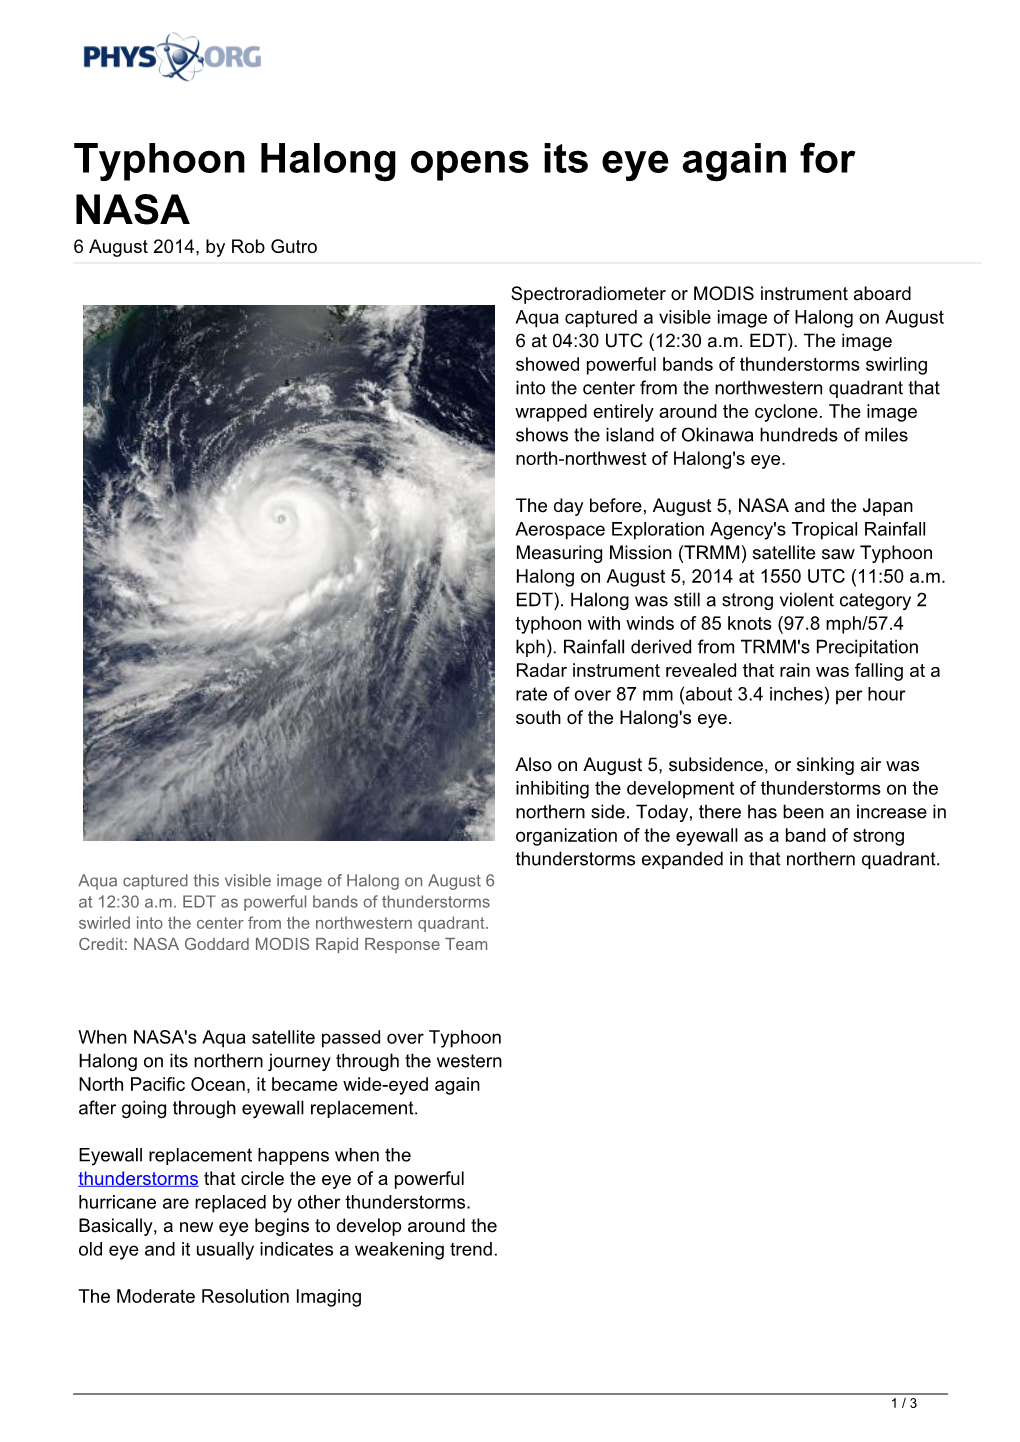 Typhoon Halong Opens Its Eye Again for NASA 6 August 2014, by Rob Gutro